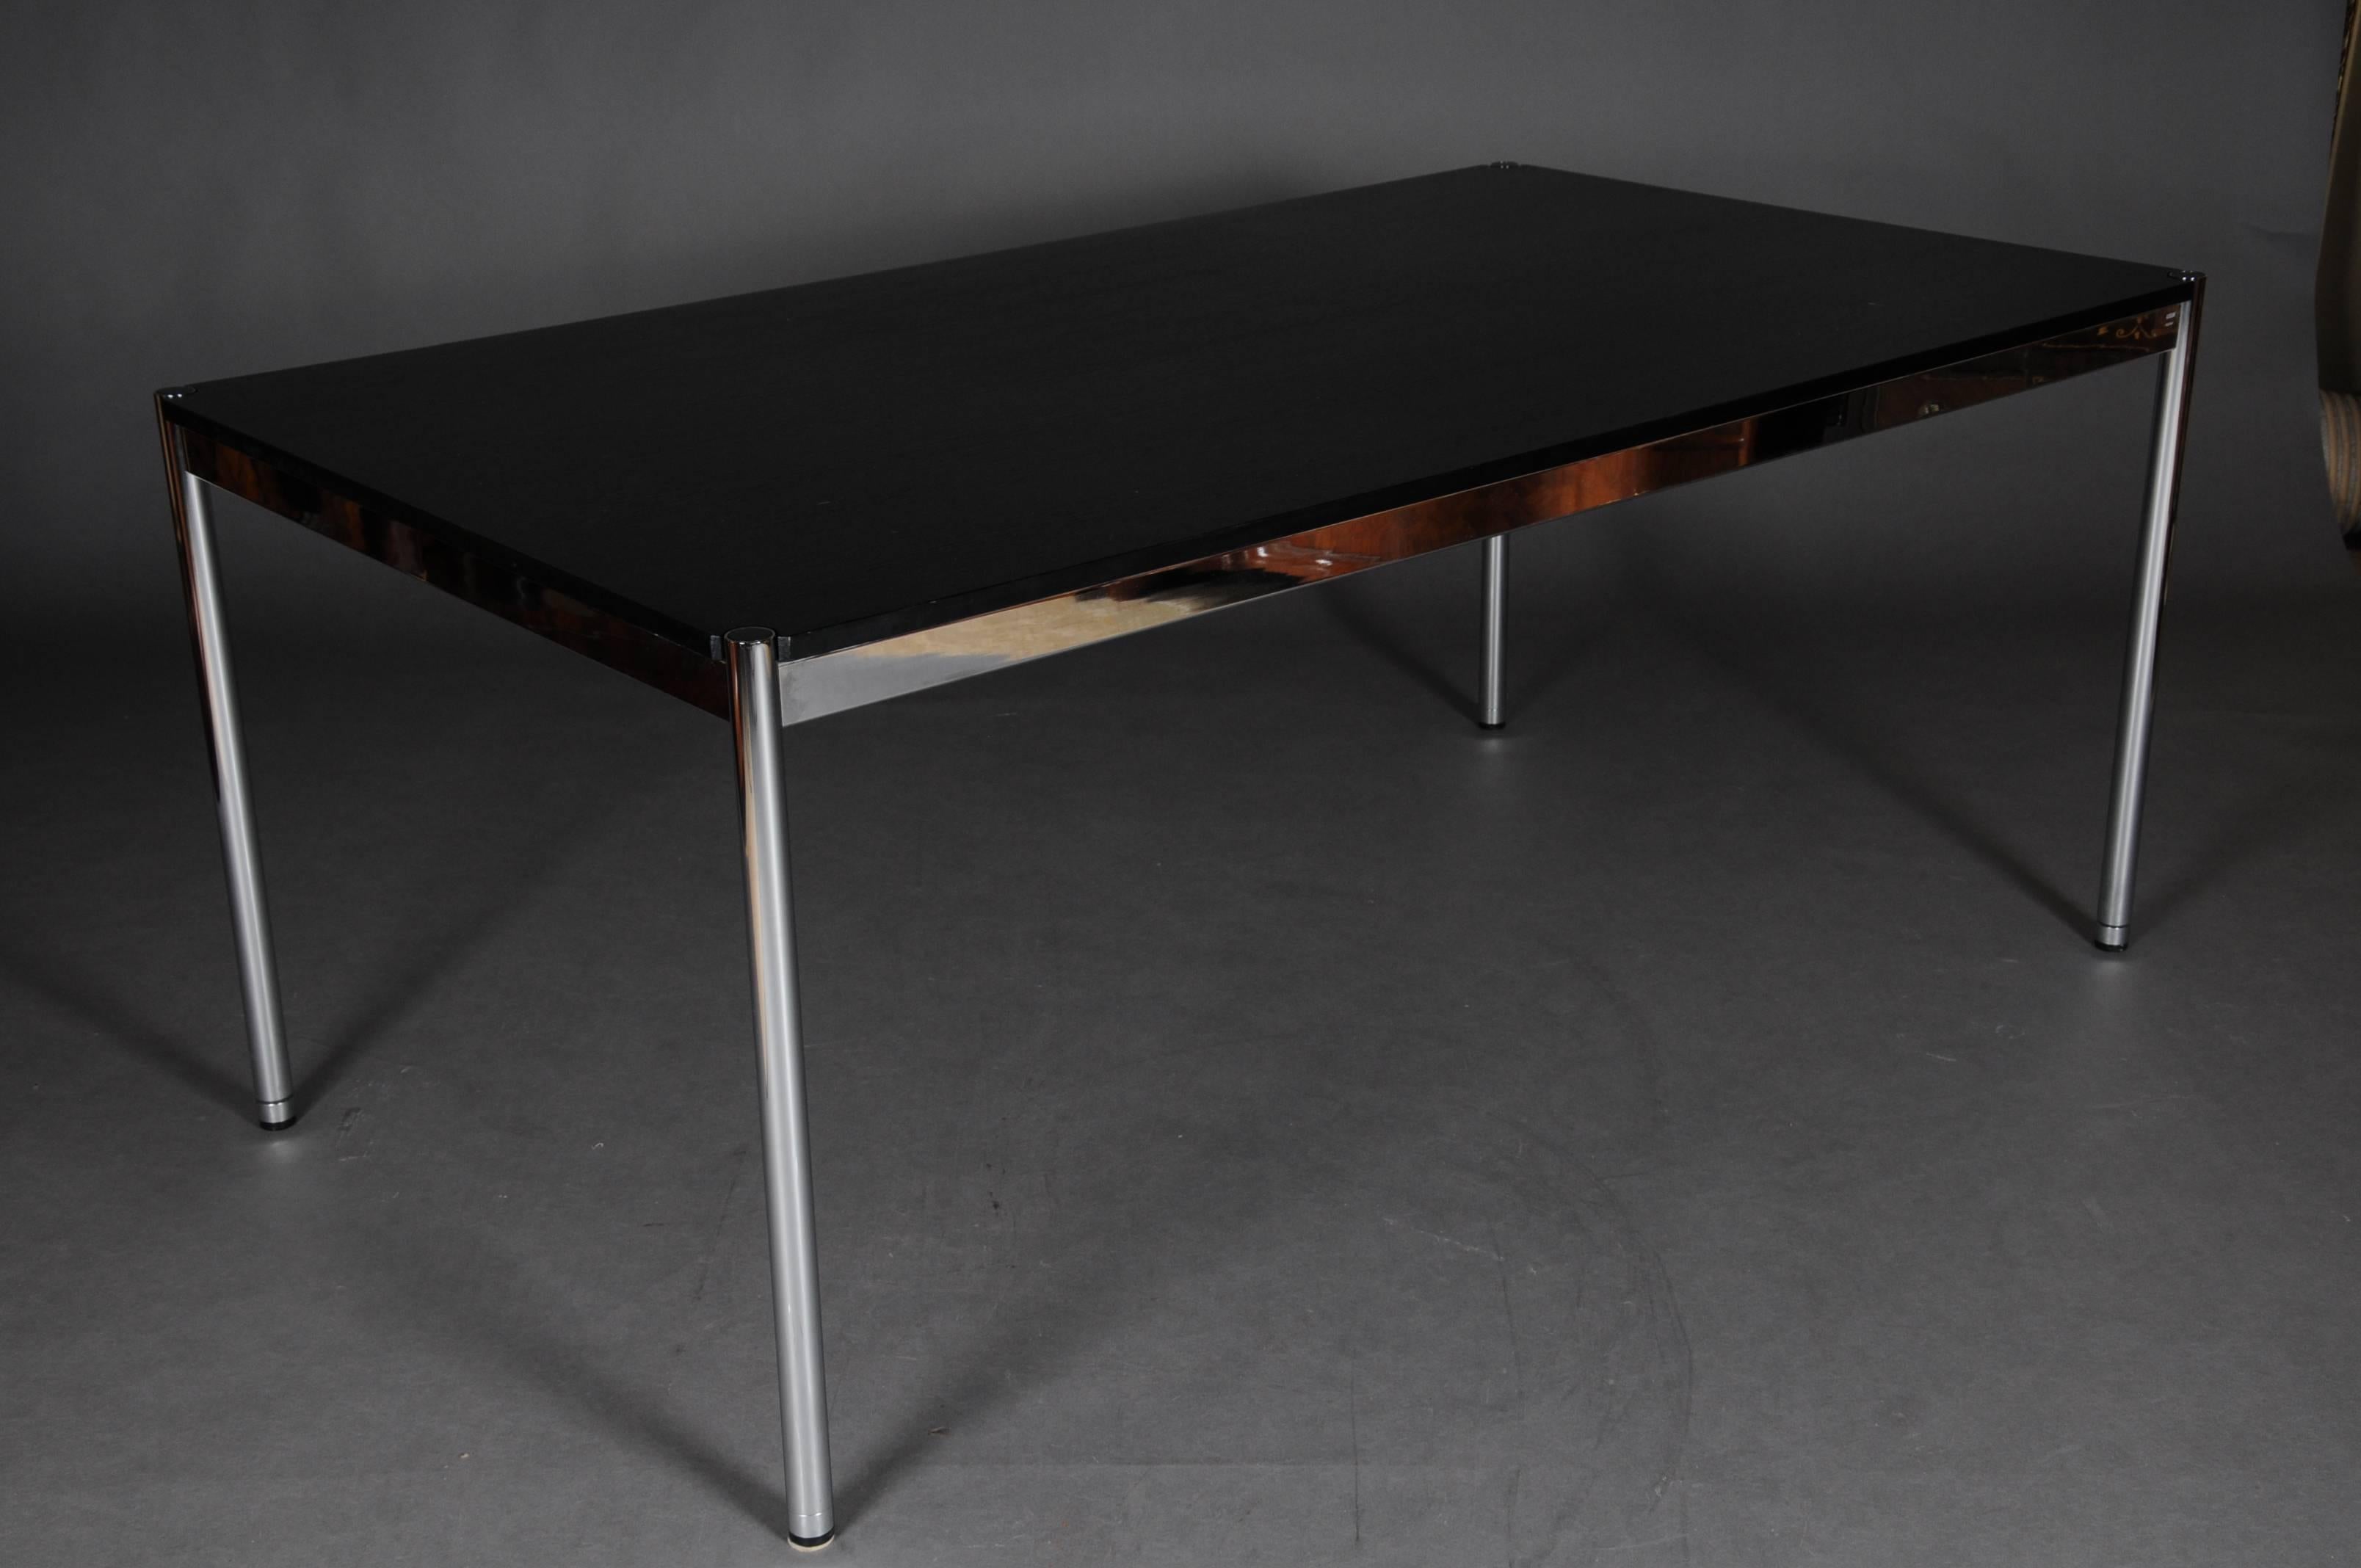 The supporting frame elements are made of precision steel tubes, and the frames are connected by means of a die-cast part which simultaneously serves to secure the table legs. The table tops have a remarkable thickness of 19 mm and edges are set.